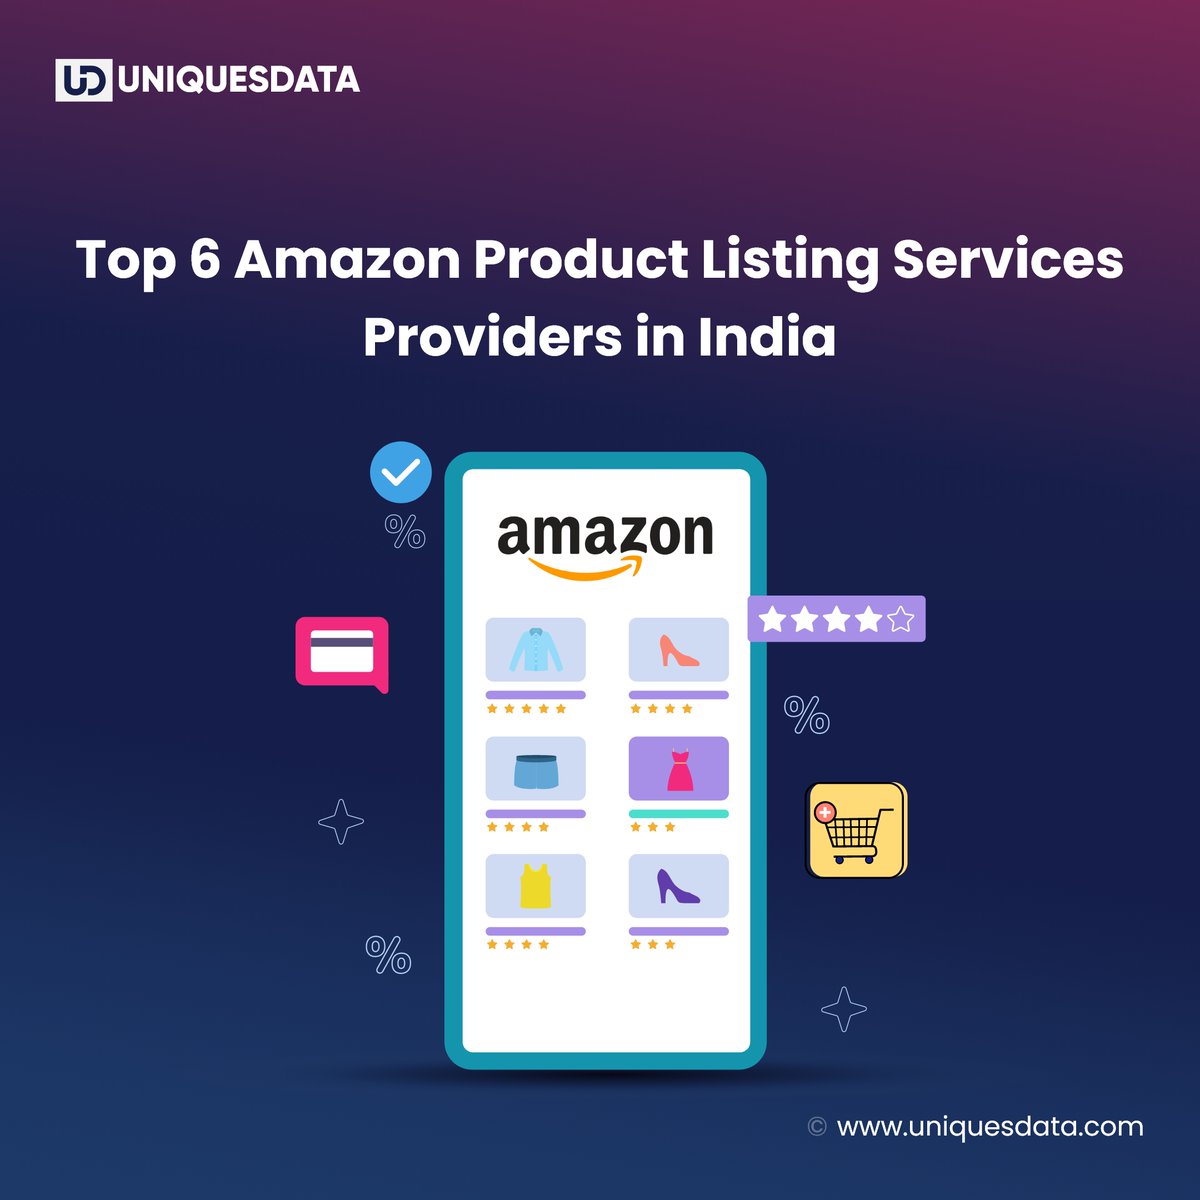 Amazon being the biggest marketplace yet an overwhelming platform for product listing. 
Here are the top 6 companies serving high-quality Amazon Product Listing services.

Get in touch for more information: bit.ly/3LbQJCj

#uniquesdata #blog #outsourcing #productlisting